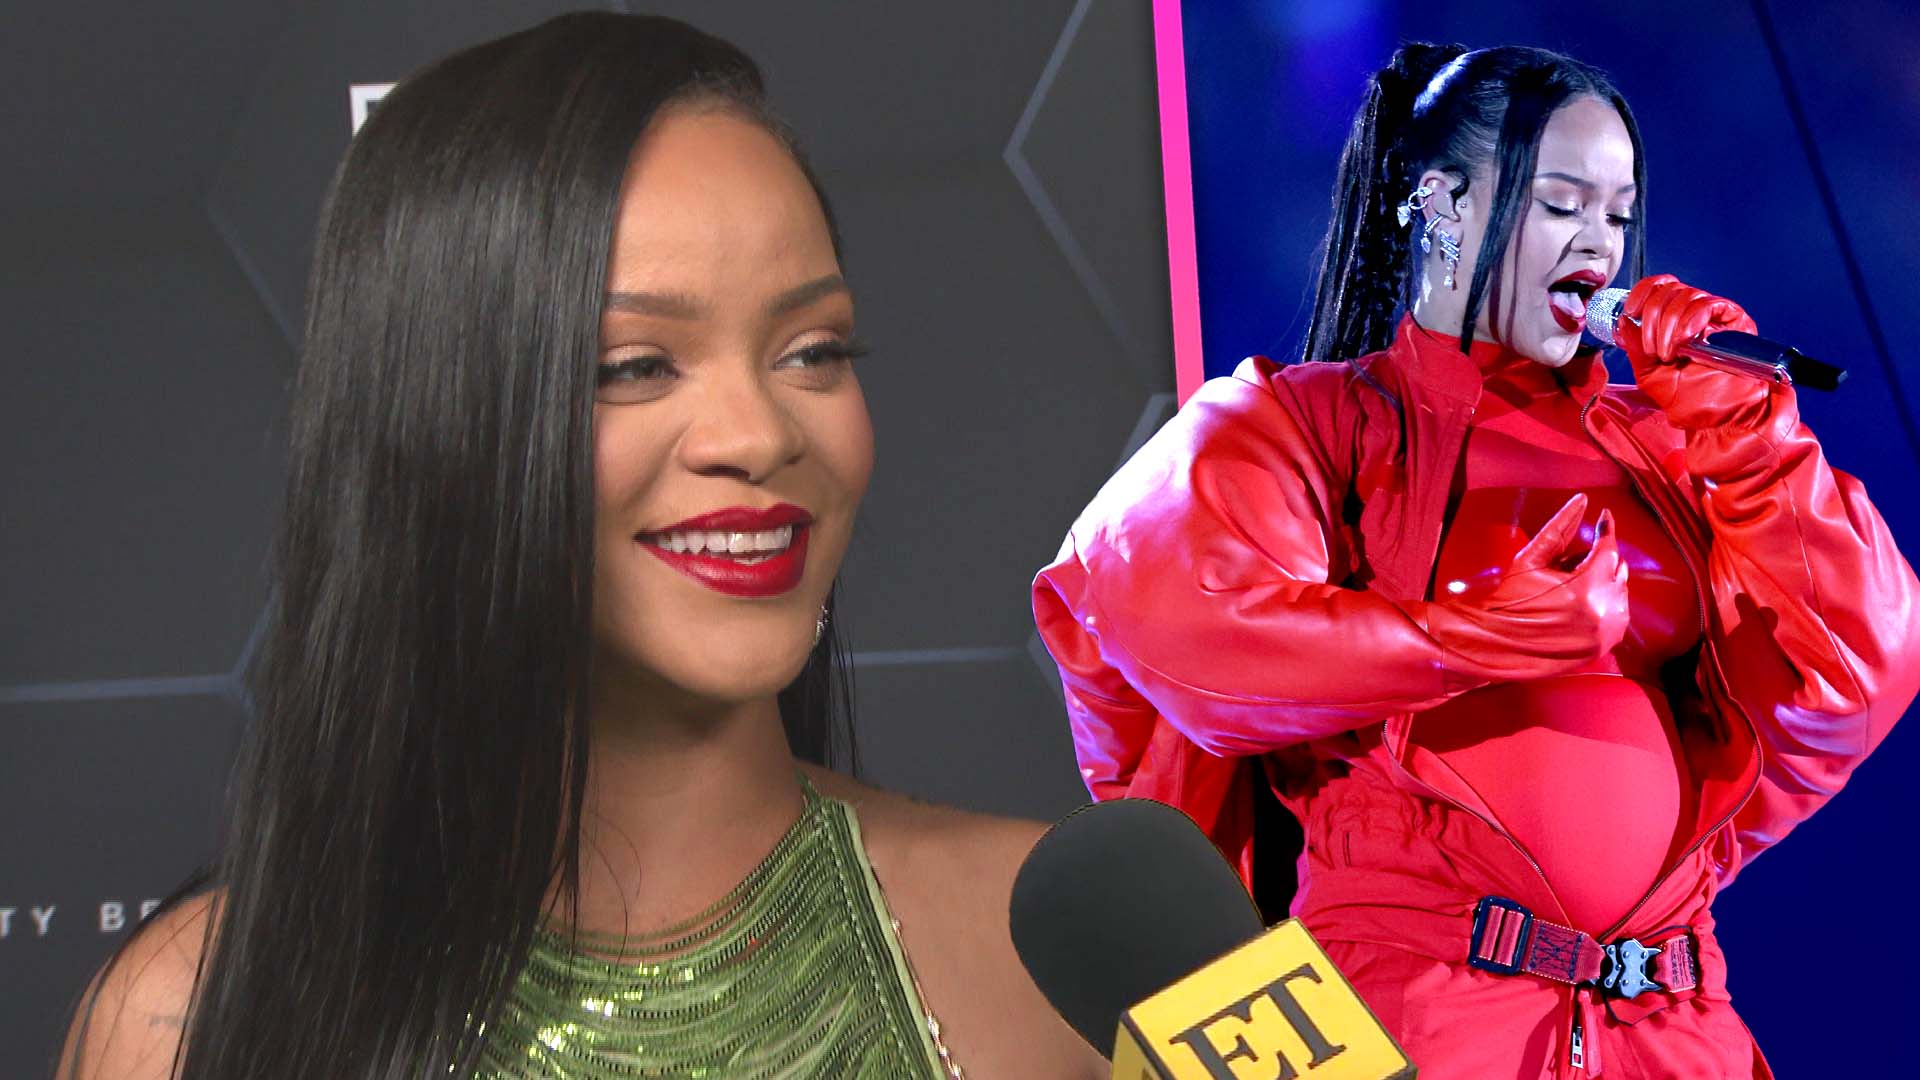 Rihanna on new album: 'I just want to have fun with music